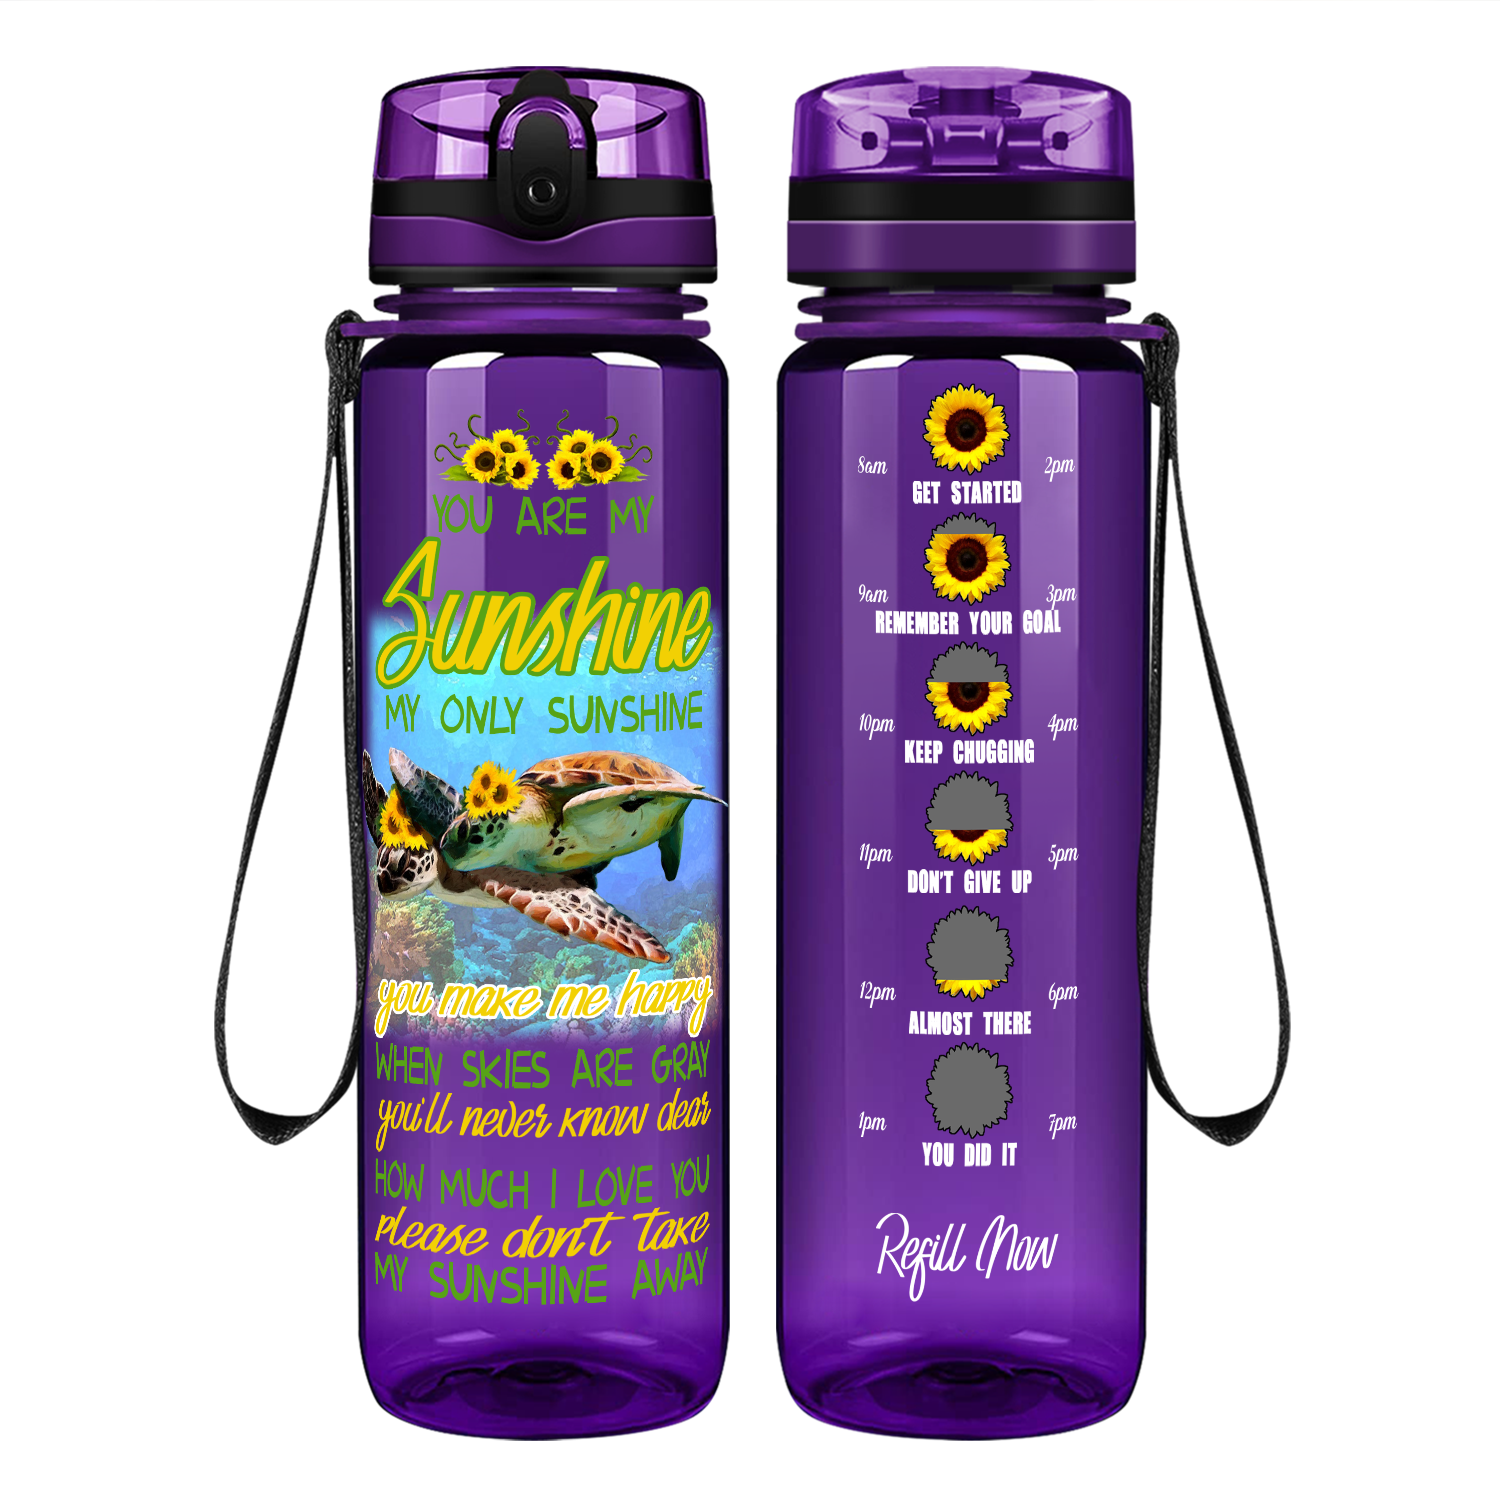 Turtles You Are My Only Sunshine on 32 oz Motivational Tracking Water Bottle